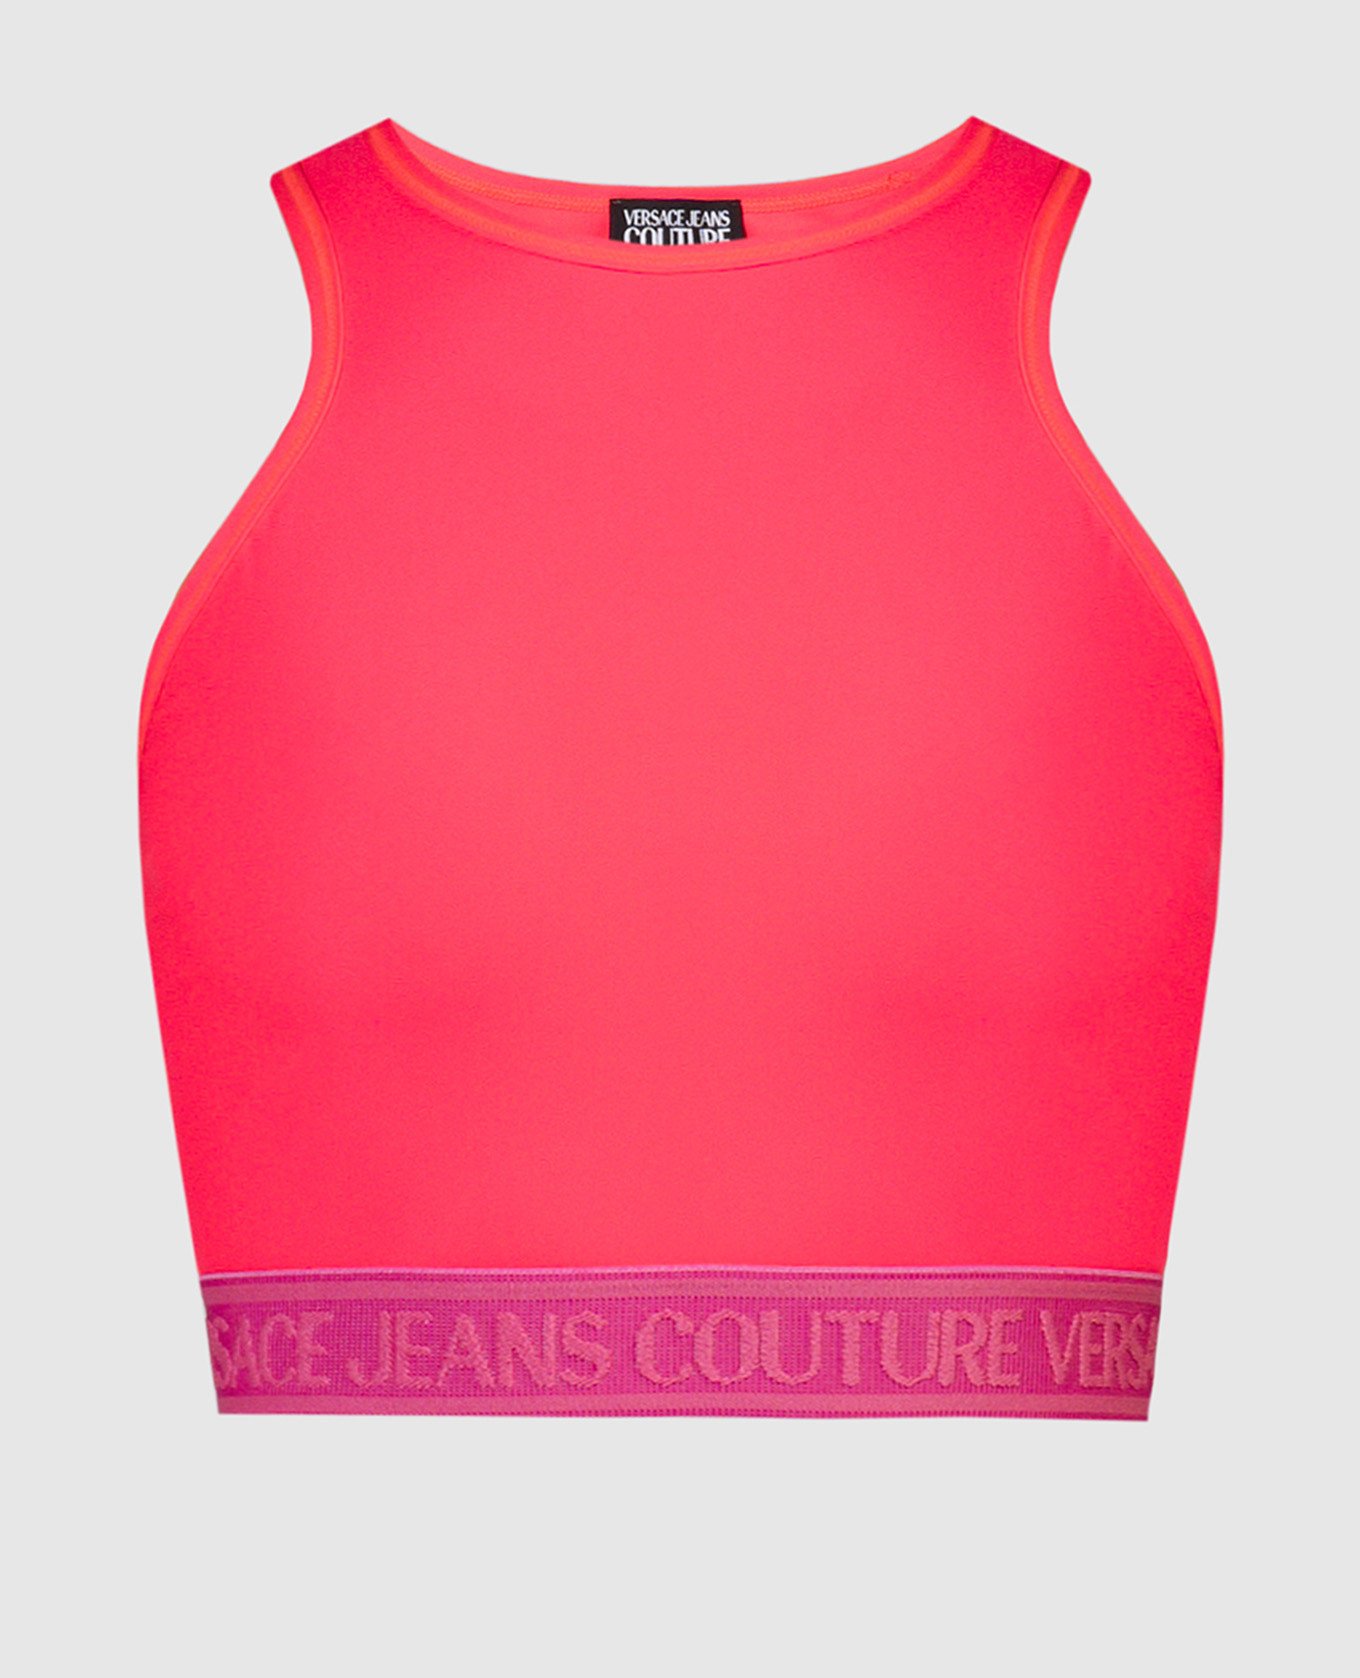 Pink top with textured logo